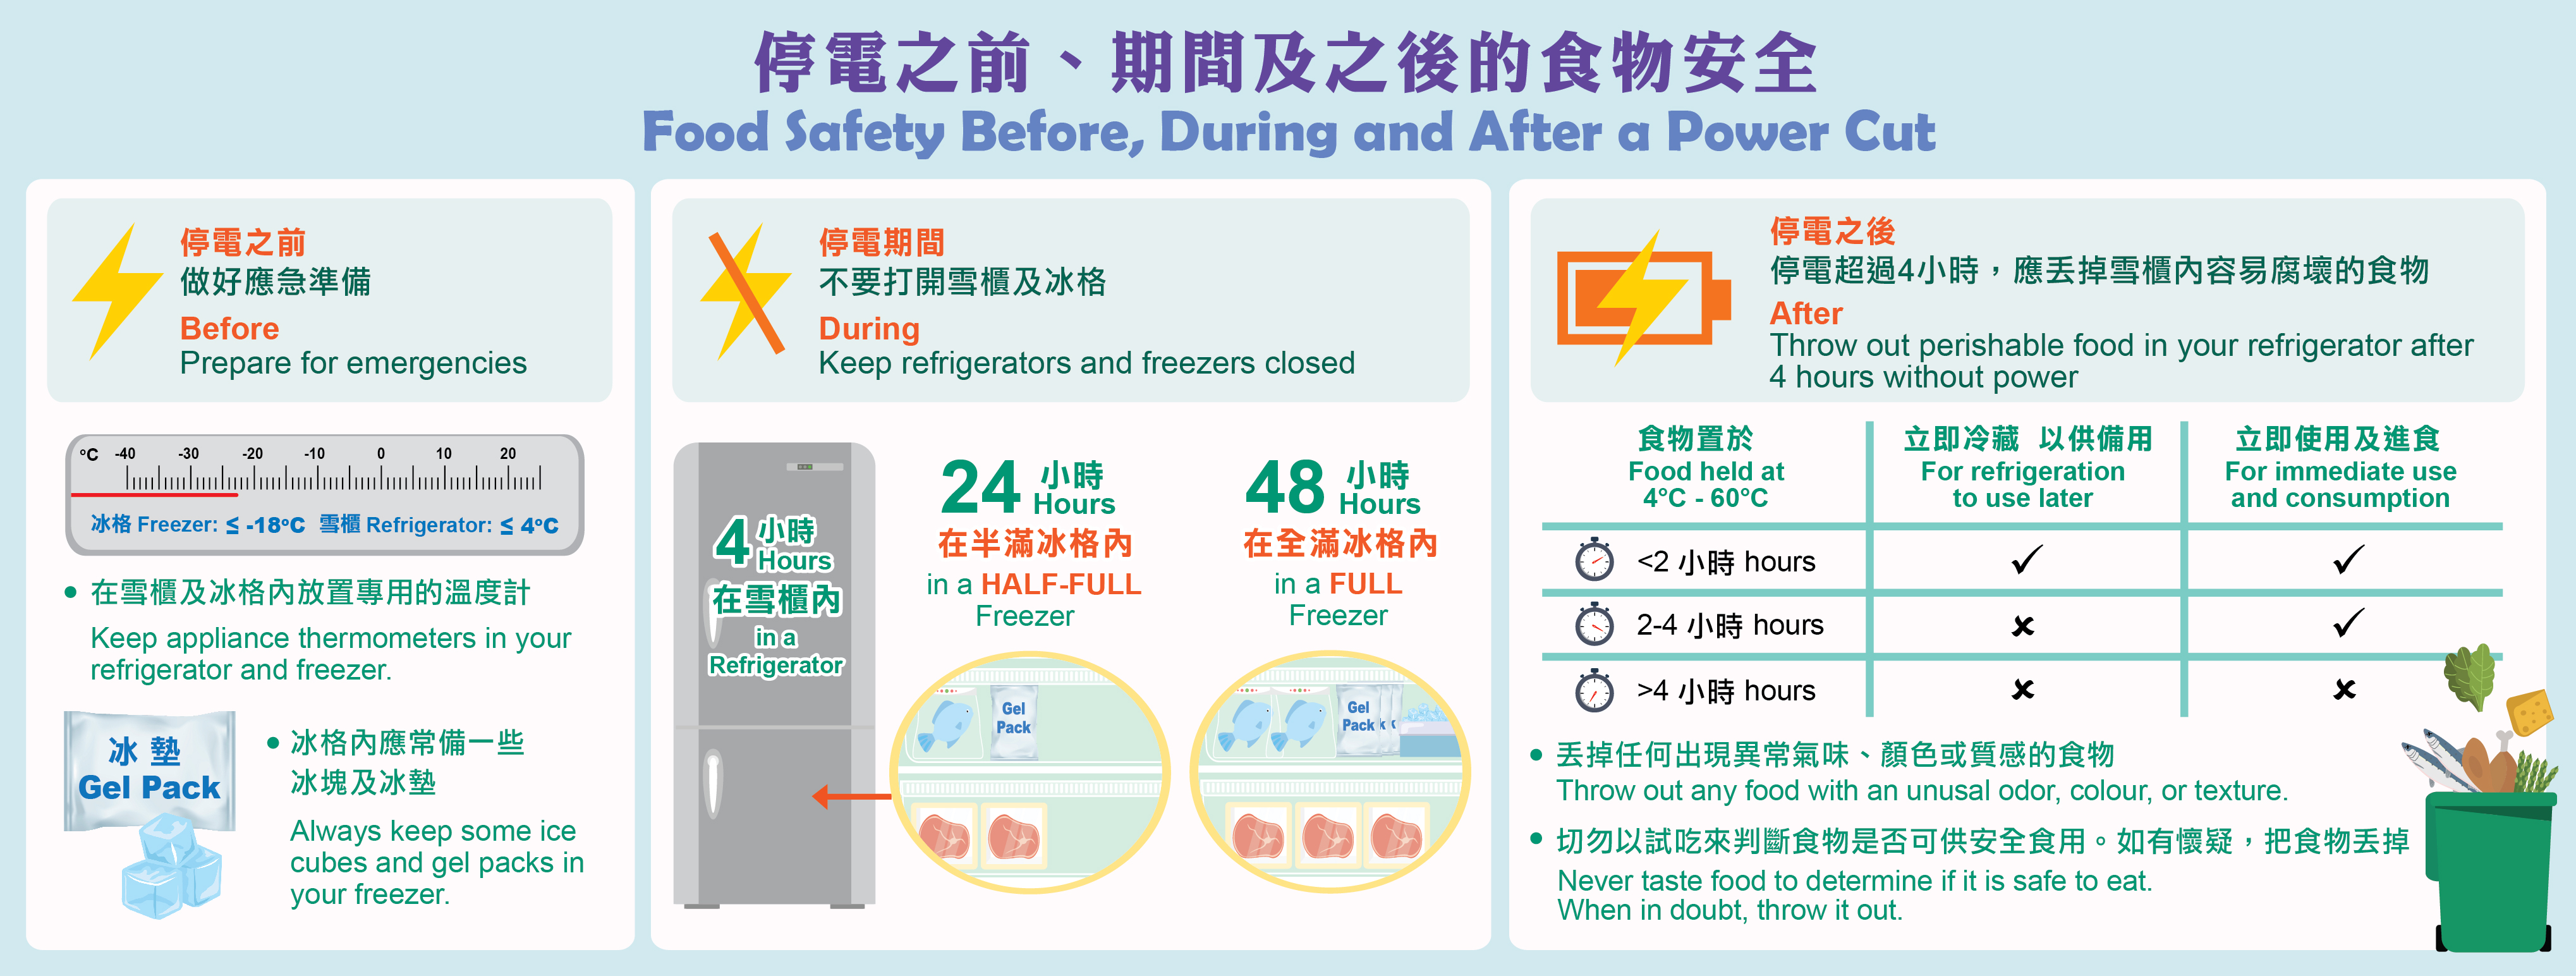 Food safety before, during and after a power cut